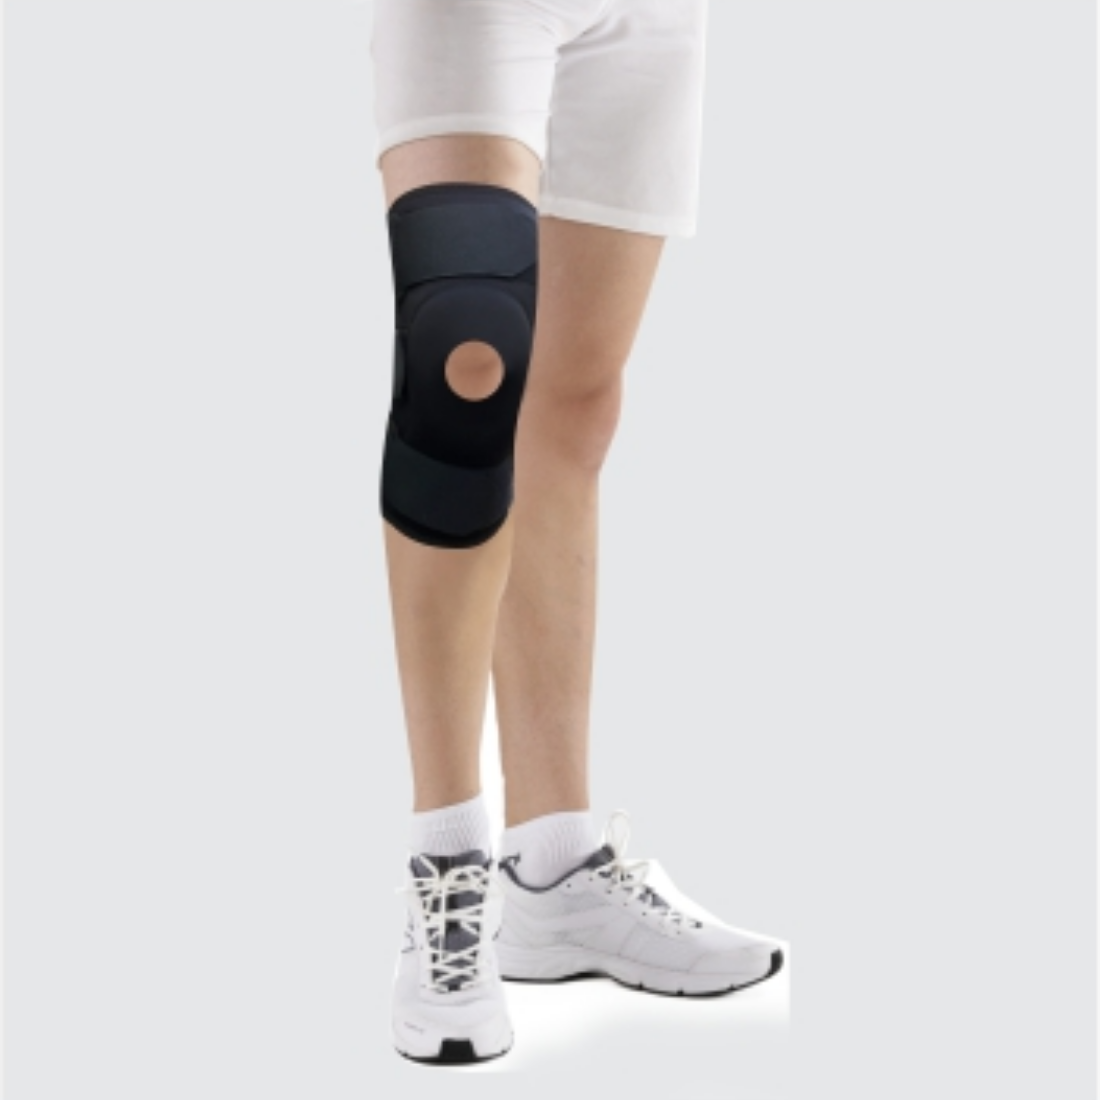 Dyna Knee Wrap is premium knee support for compression and support of the patella to manage sports injuries, arthritic pain, inflammation of the knee.